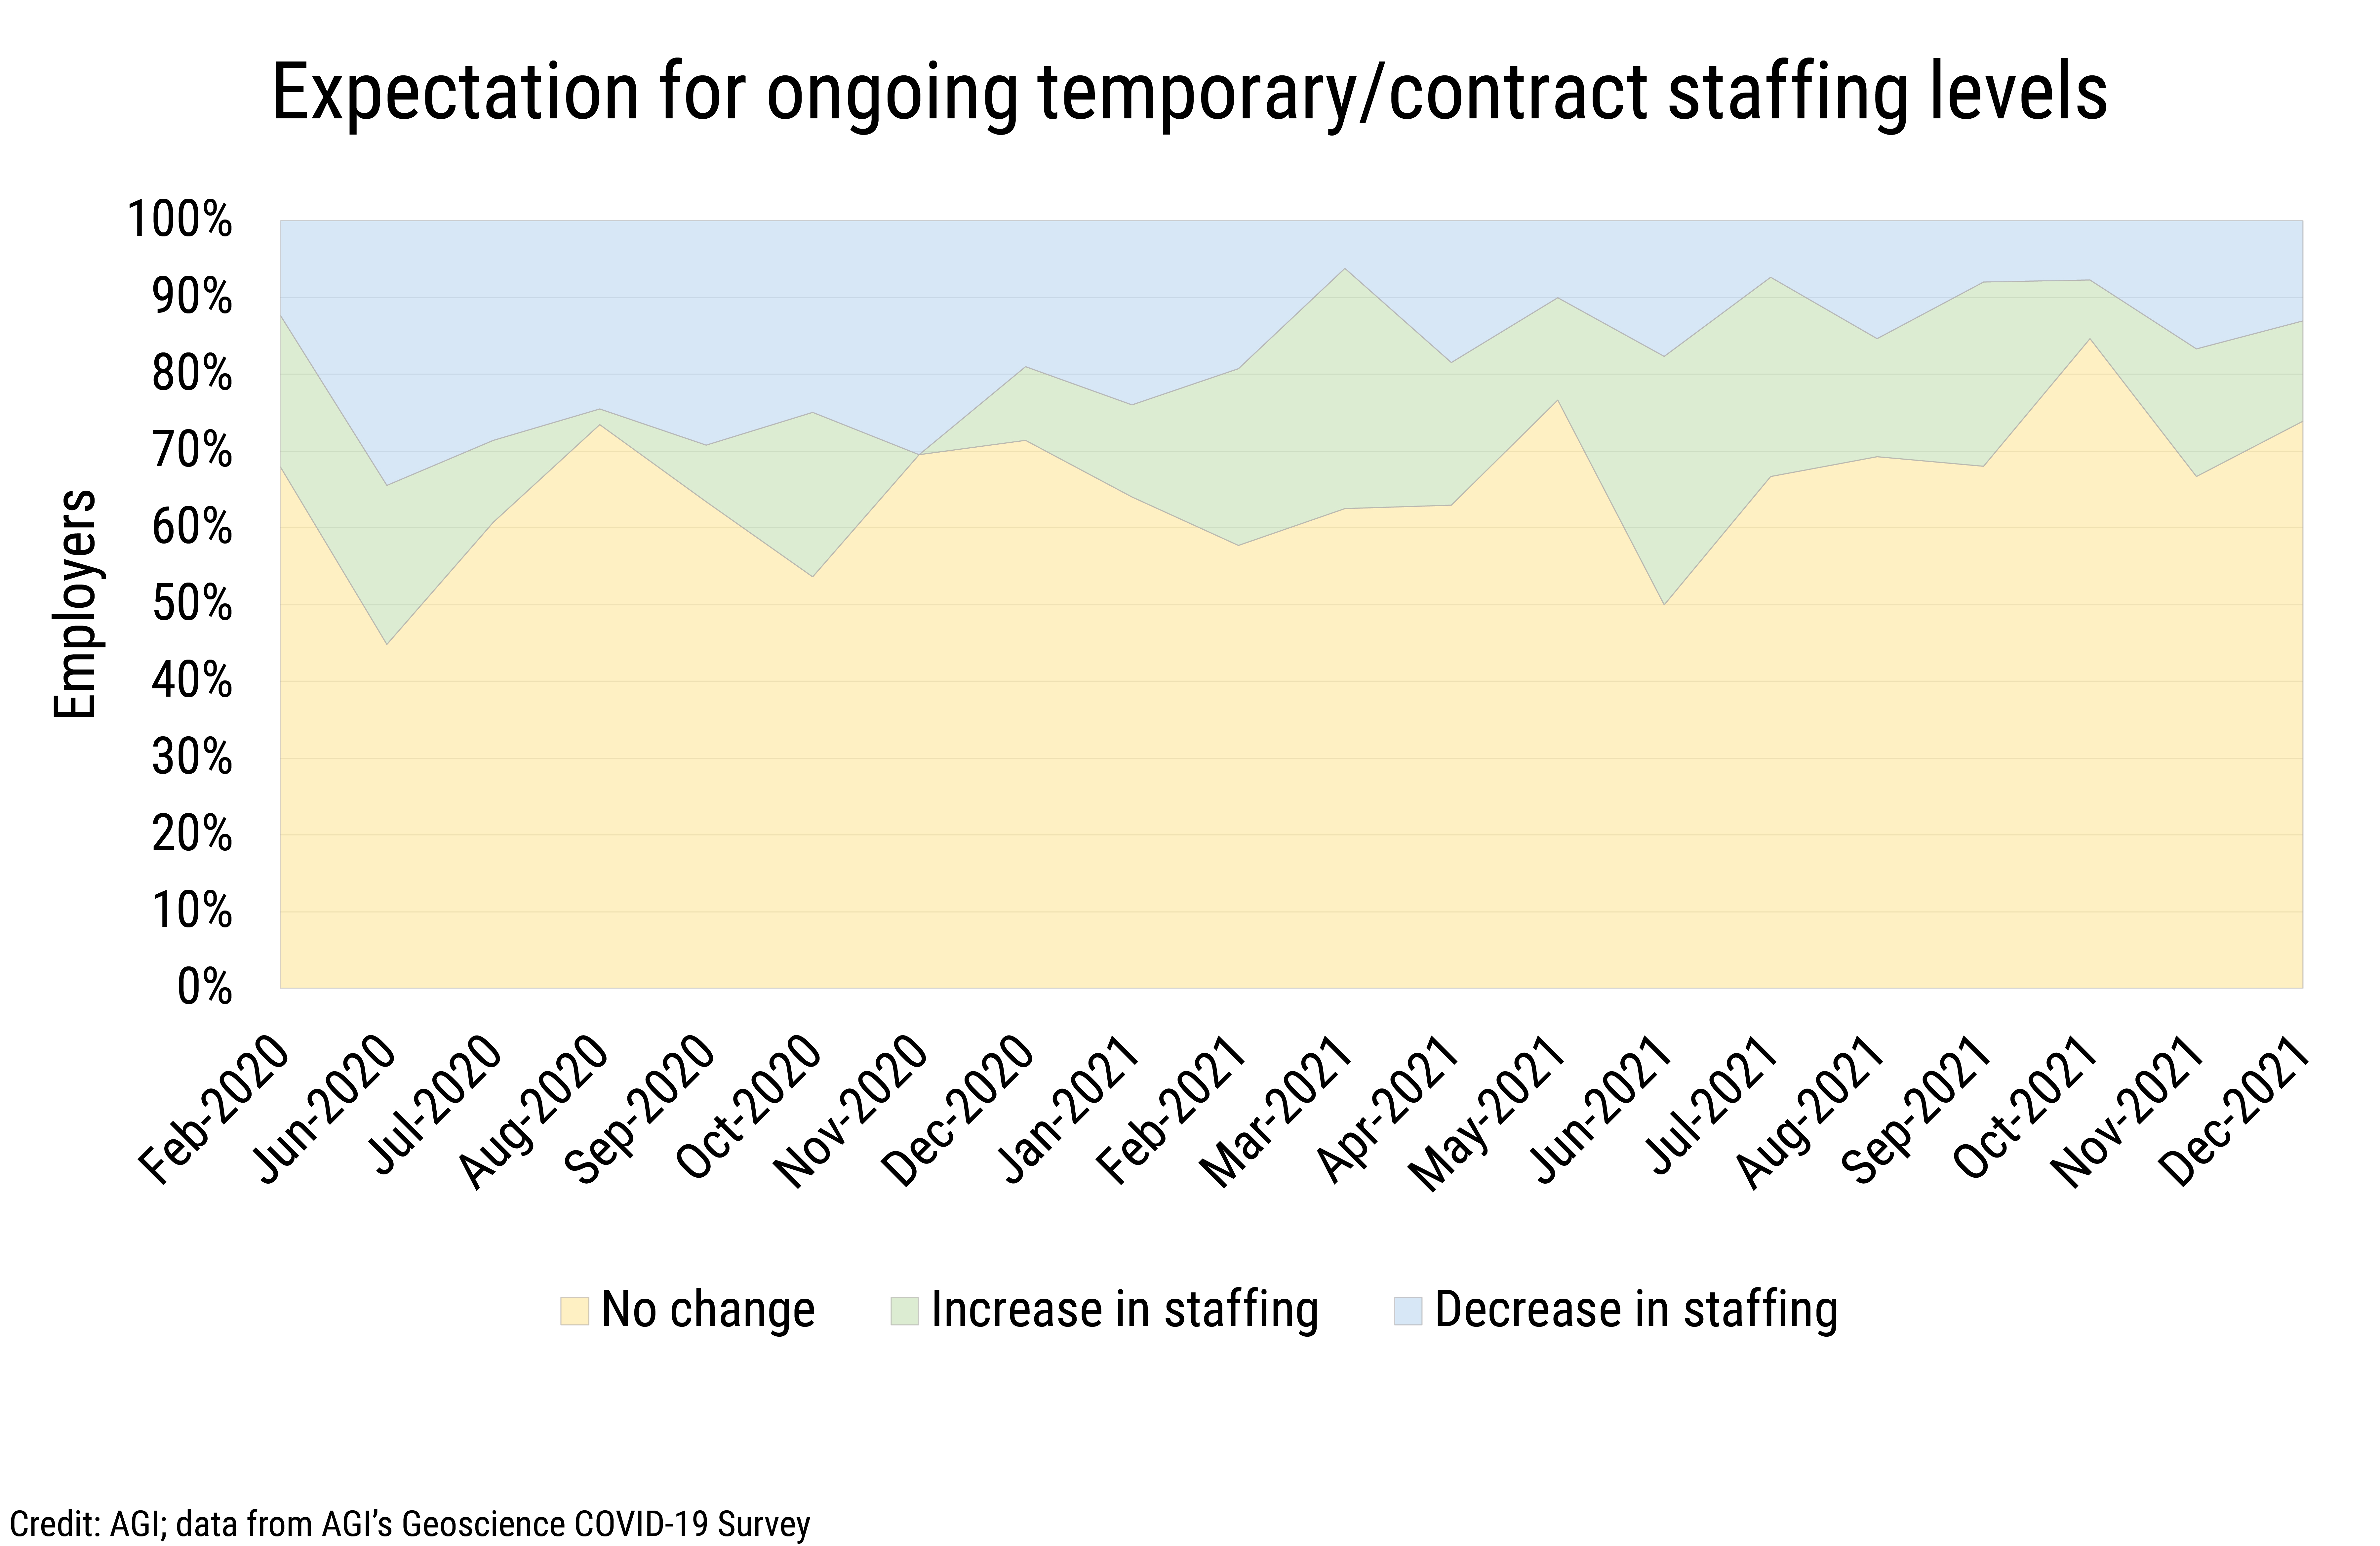 DB_2022-003 chart 02: Expectation for ongoing temporary/contract staffing levels(Credit: AGI; data from AGI&#039;s Geoscience COVID-19 Survey)